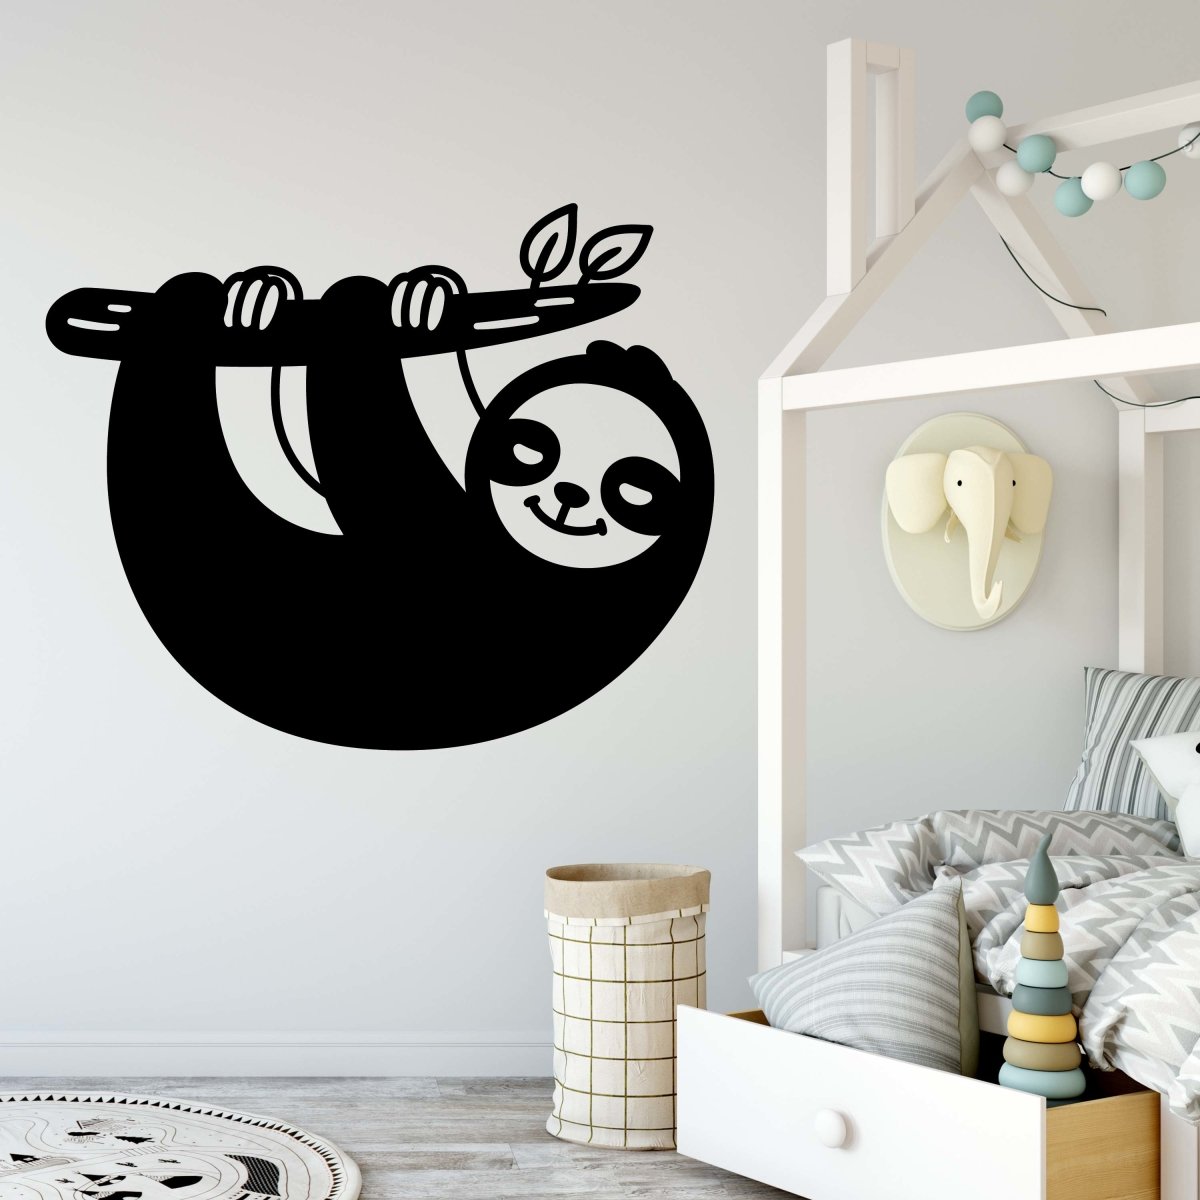 Discover the wall decal sloth on a branch WT00000070